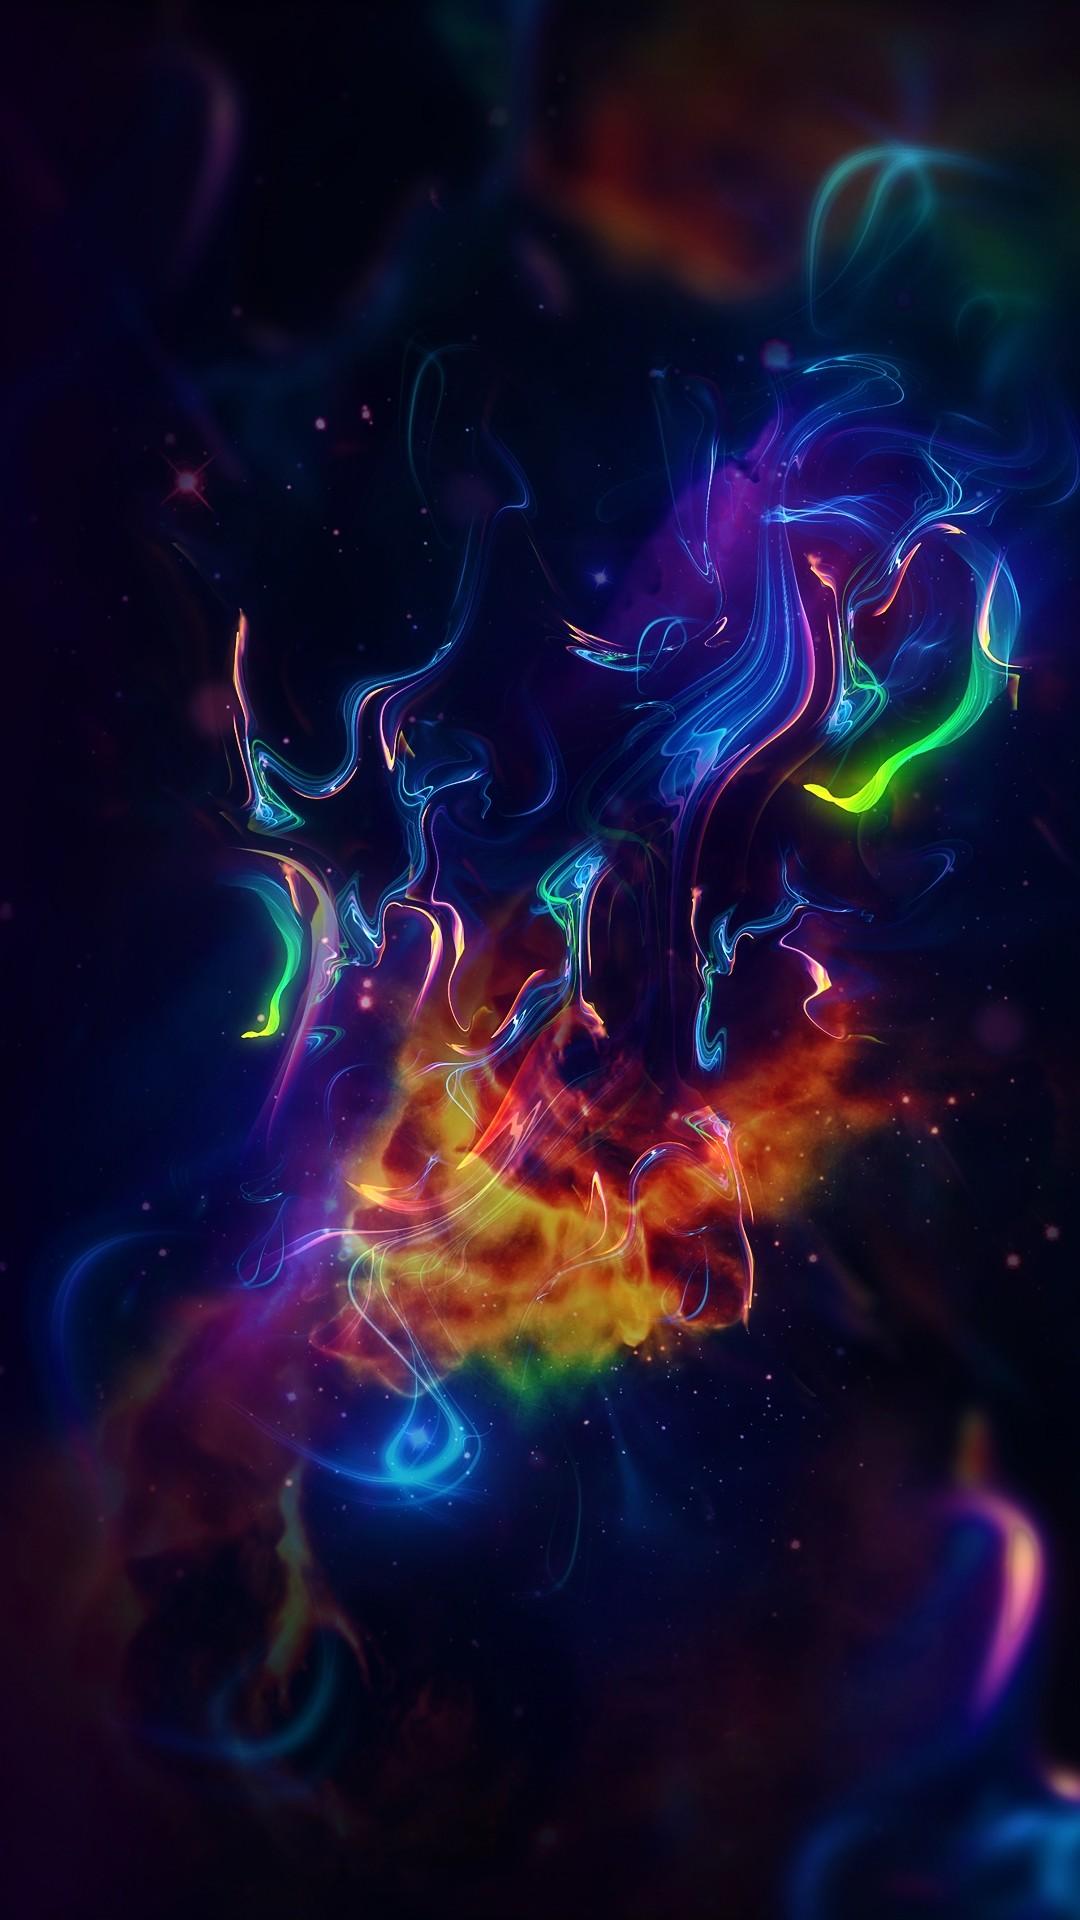 1080 x 1920 · jpeg - Neon iPhone Wallpapers (22+ images) - WallpaperBoat